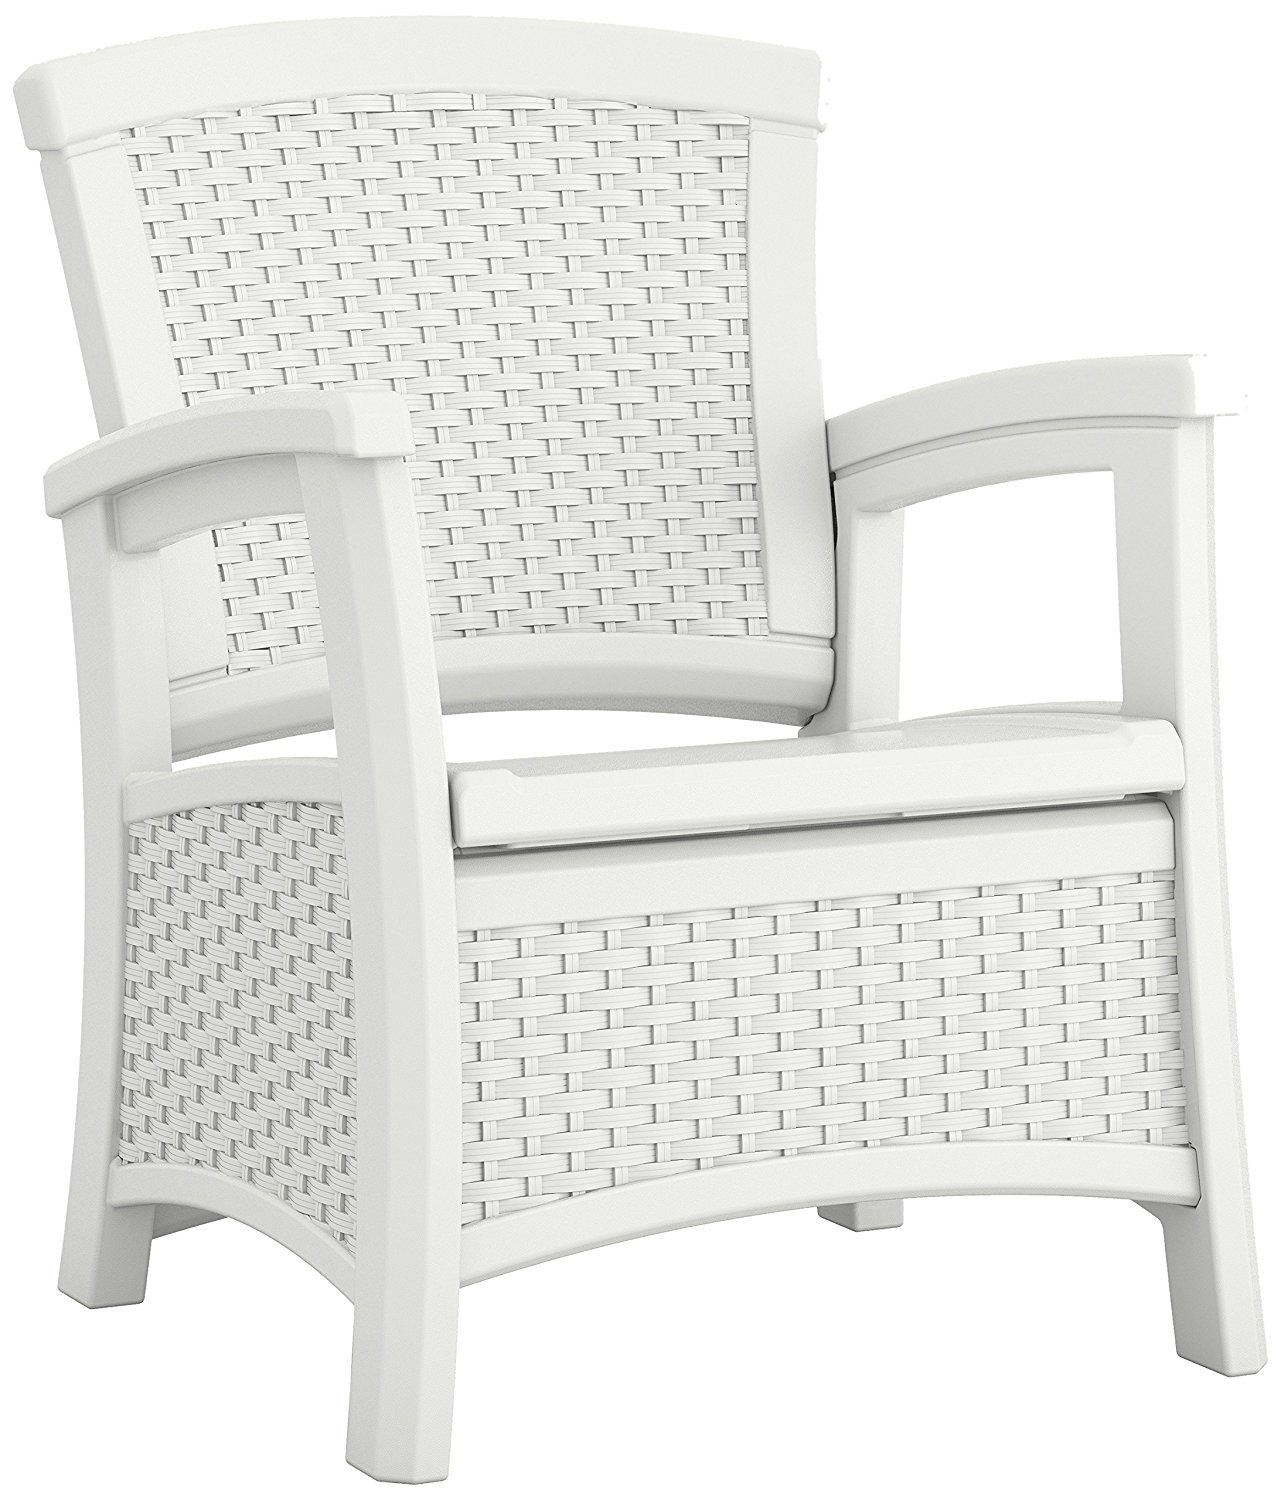 Suncast ELEMENTS Club Chair with Storage, White 